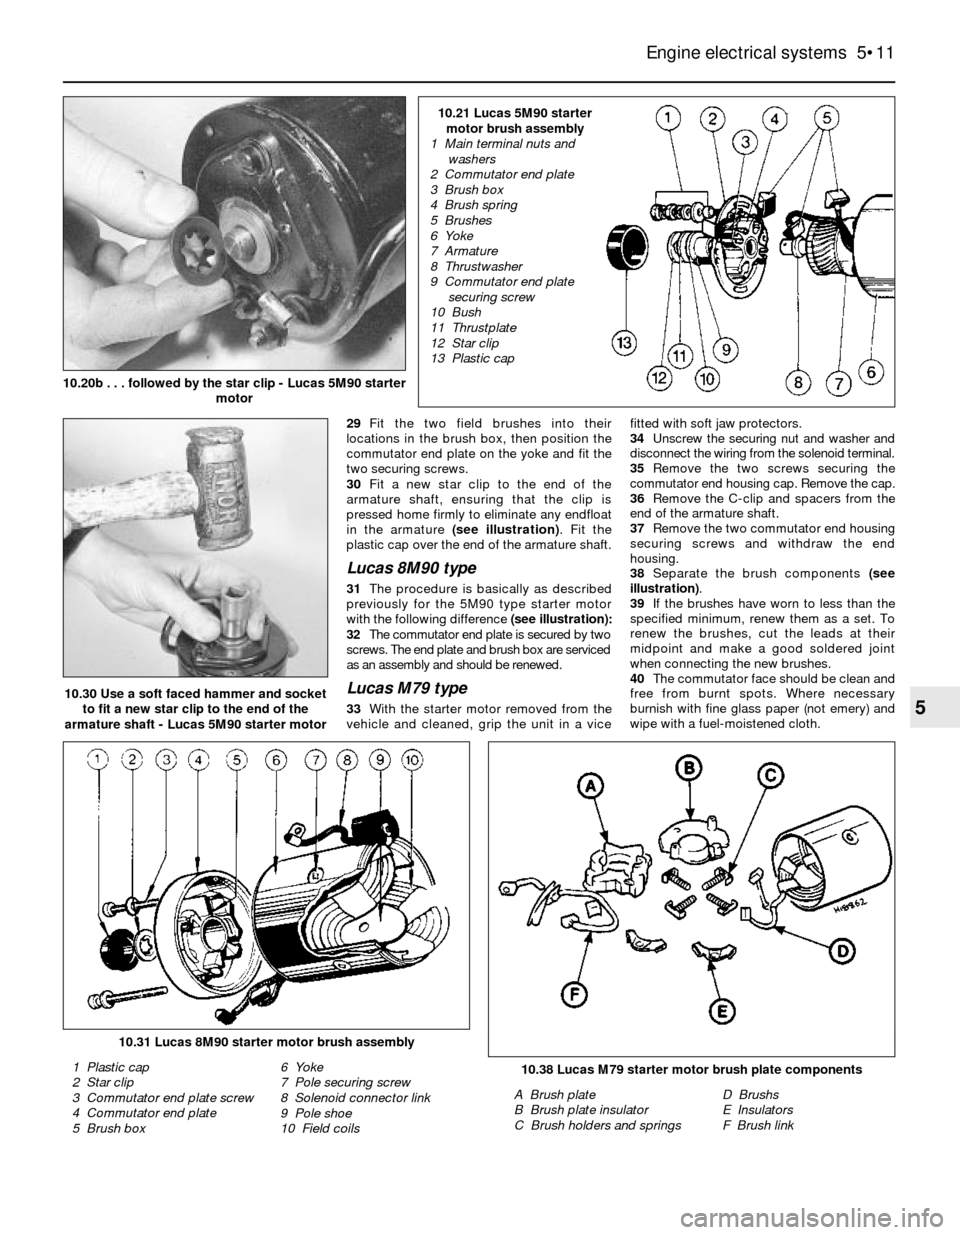 FORD SIERRA 1989 2.G Engine Electrical Systems User Guide 29Fit the two field brushes into their
locations in the brush box, then position the
commutator end plate on the yoke and fit the
two securing screws.
30Fit a new star clip to the end of the
armature 